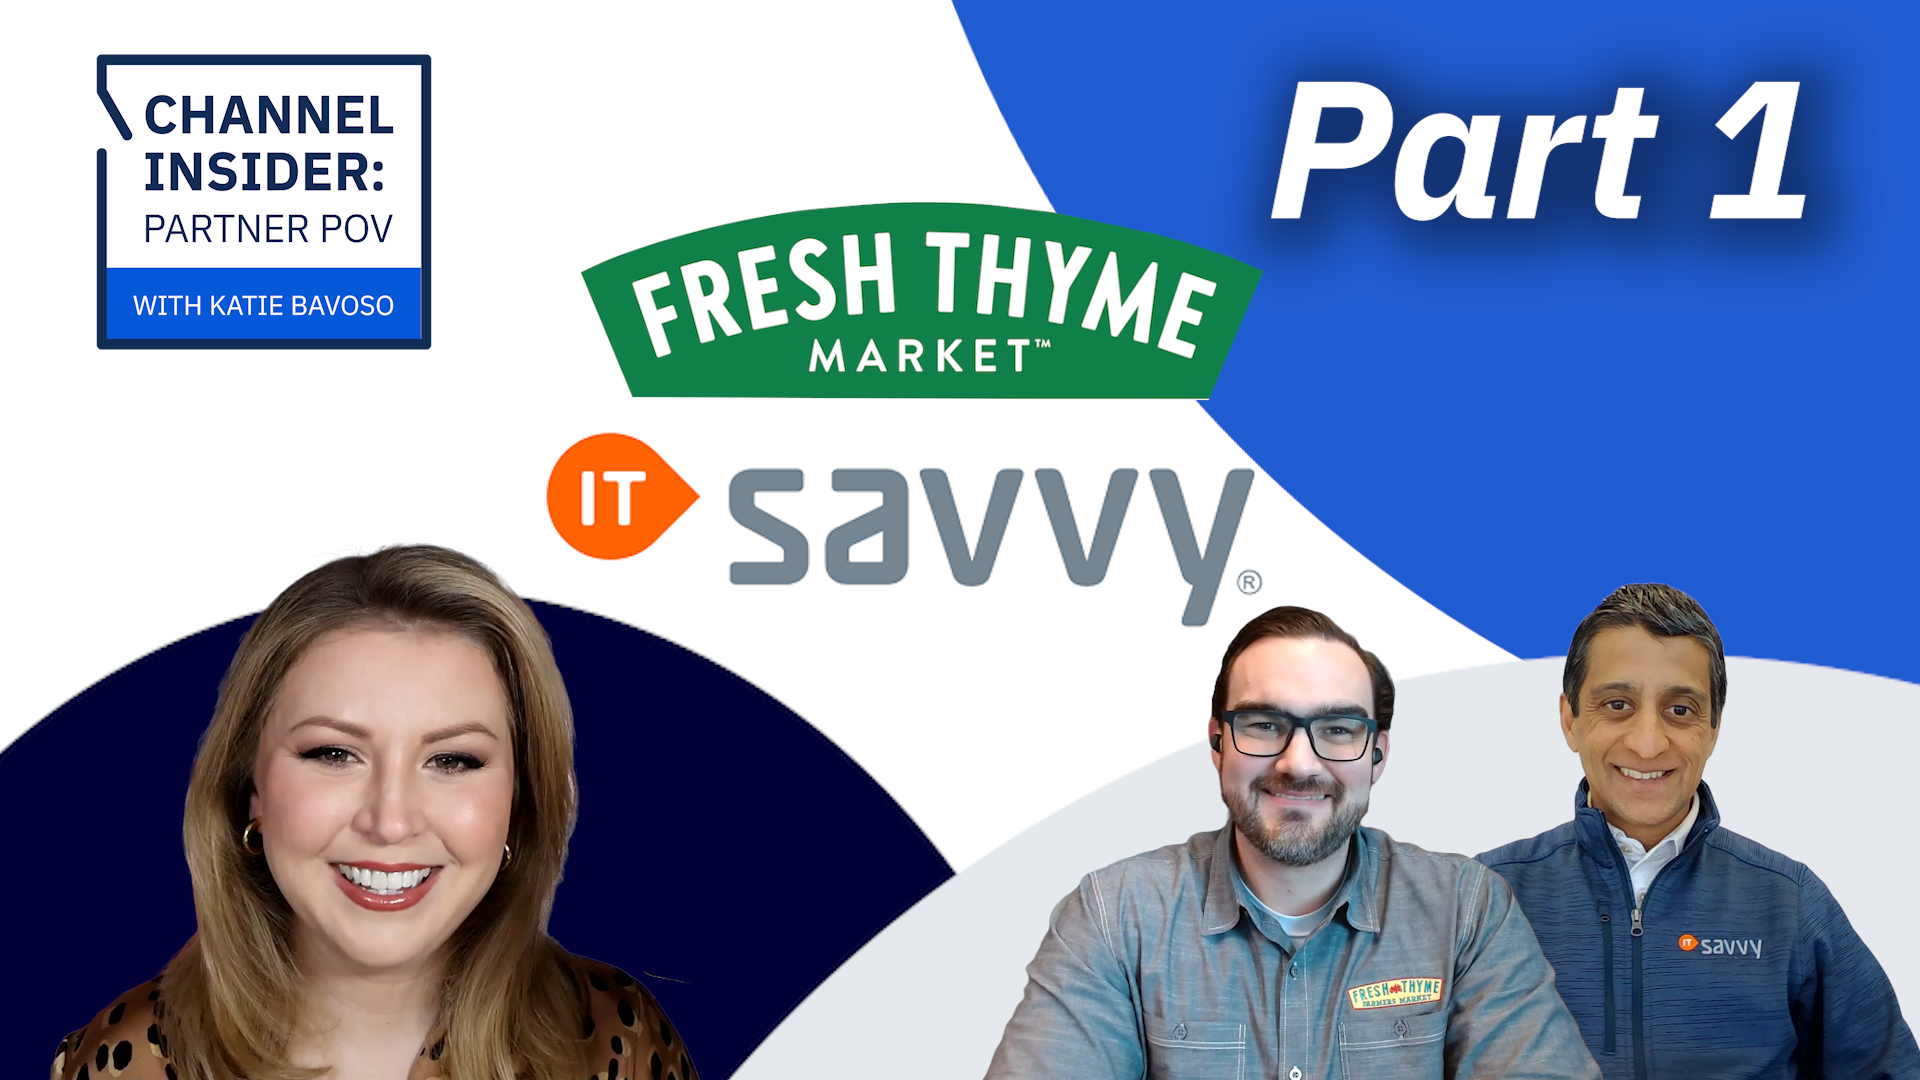 Video: ITsavvy Innovating the Retail Experience at Fresh Thyme Market